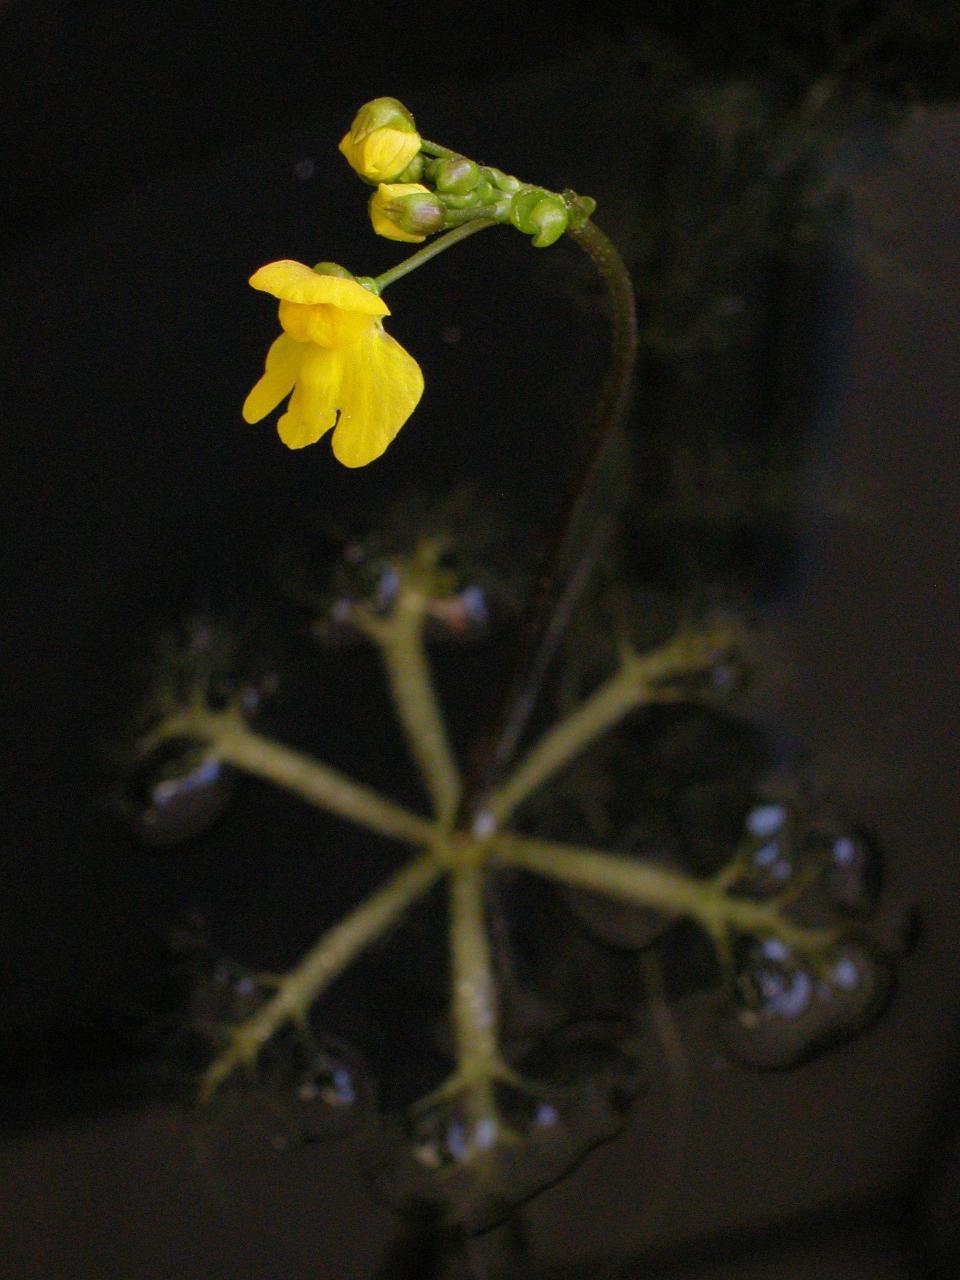 You might see the floating bladderwort in any of the coastal counties of the Southeast.